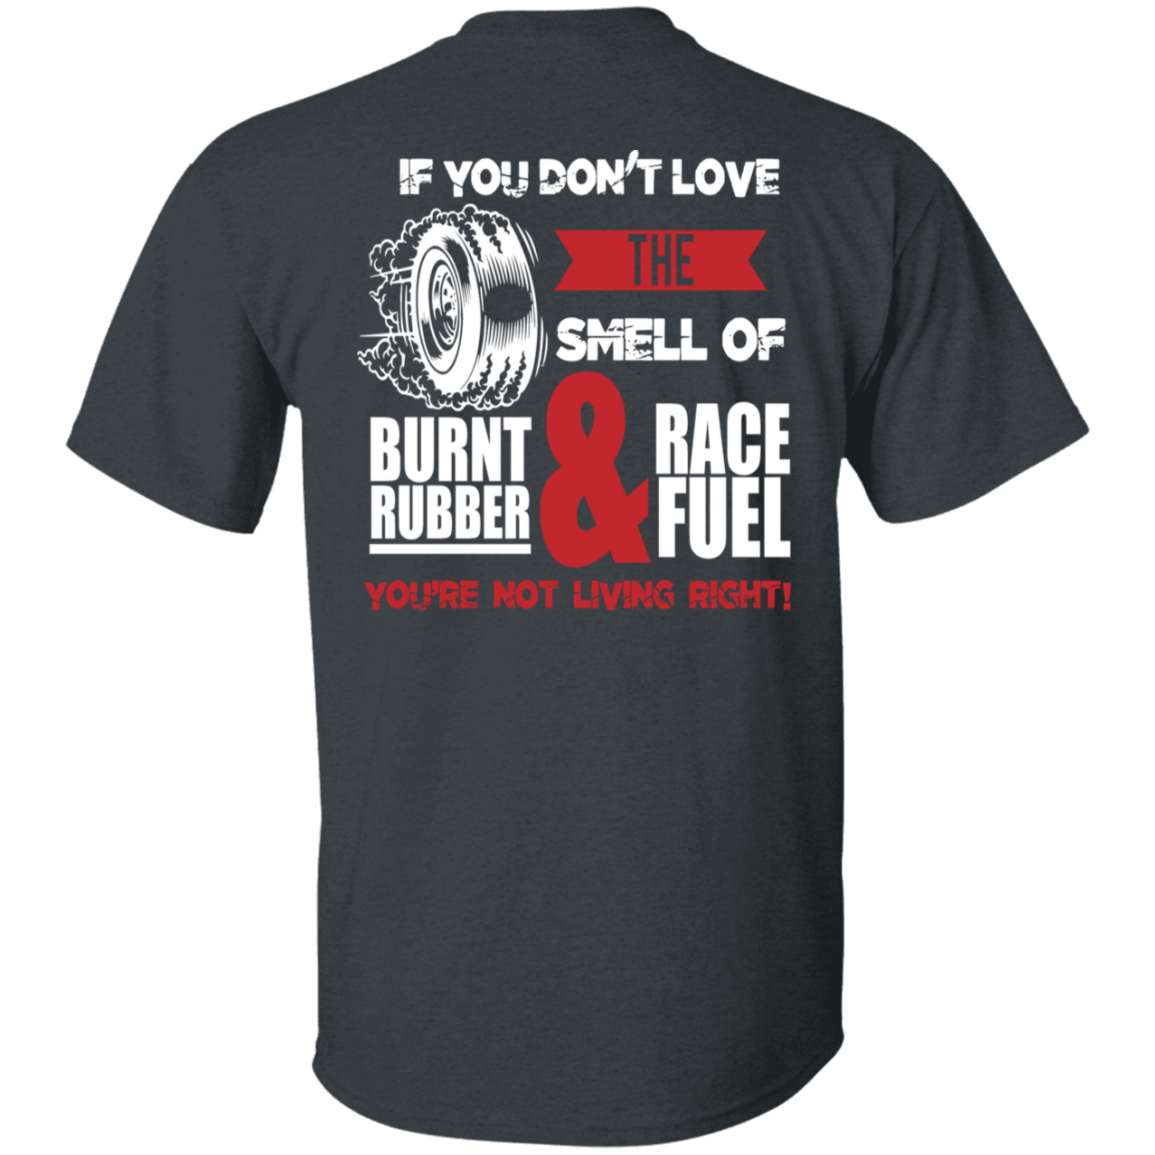 If You Don't Love The Smell Of Burnt Rubber And Race Fuel T-Shirts 5.3 oz. T-Shirt